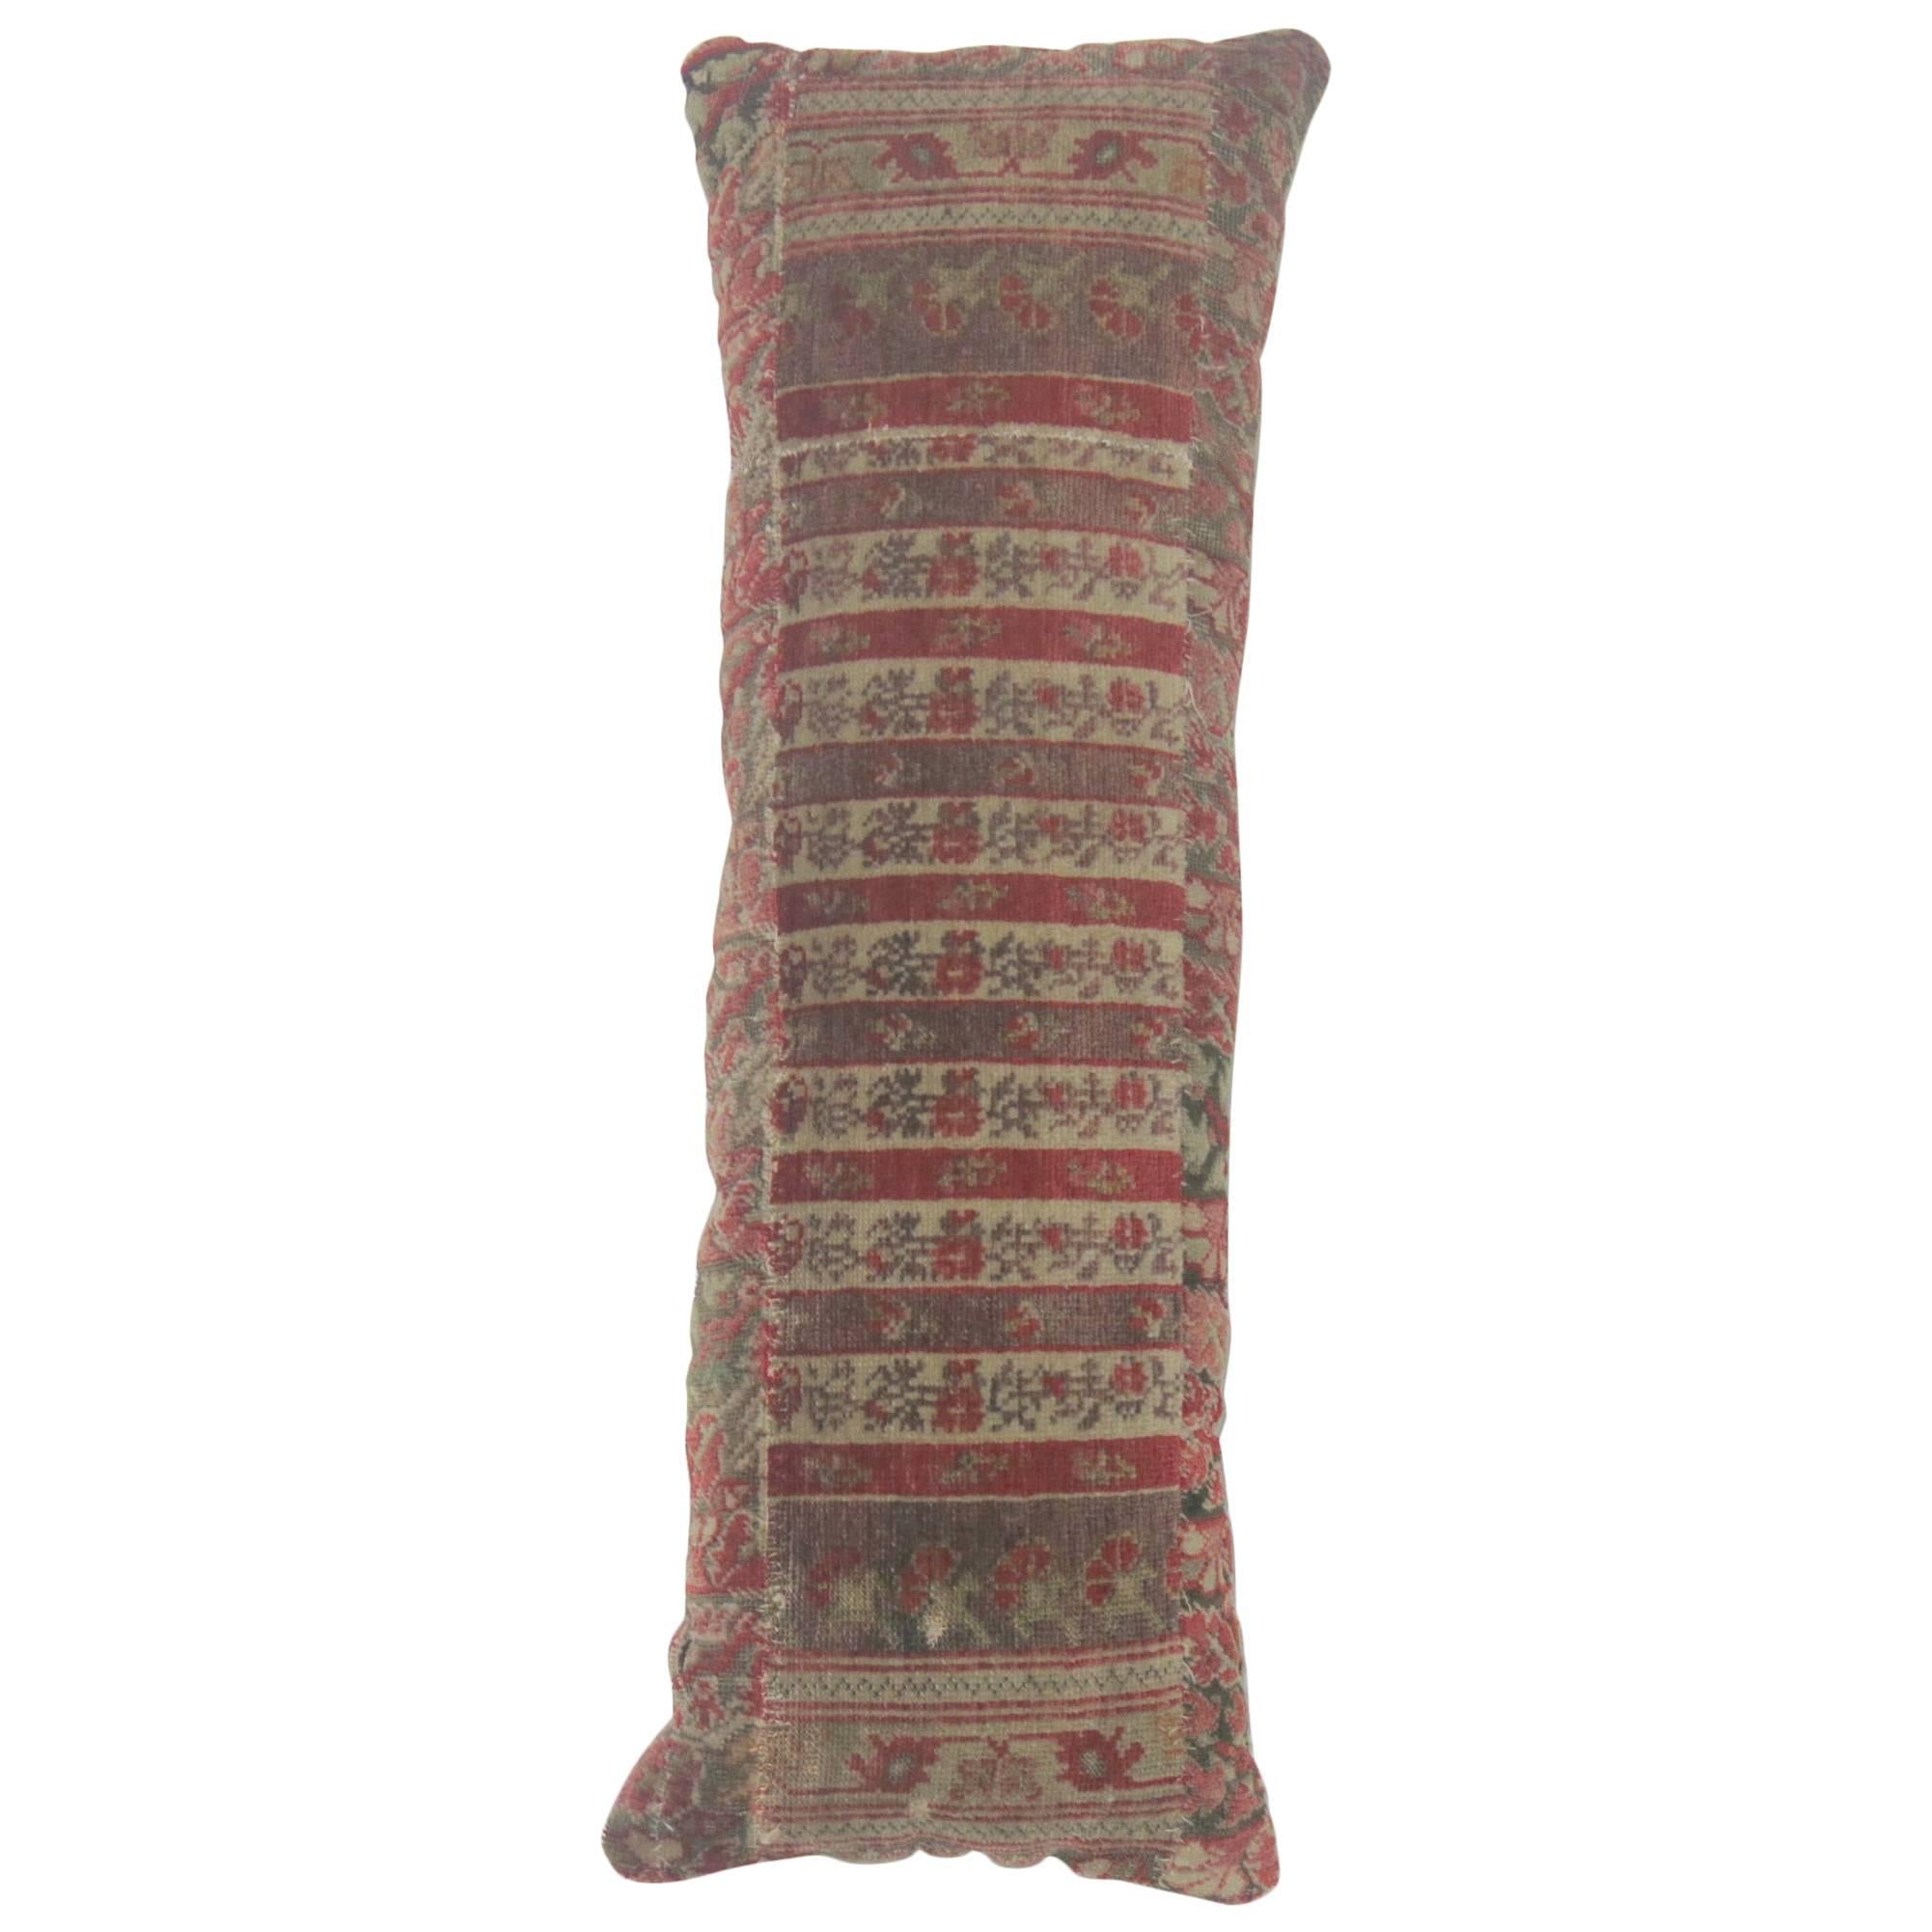 Silk Turkish Bolster Pillow Fragment from the 18th Century